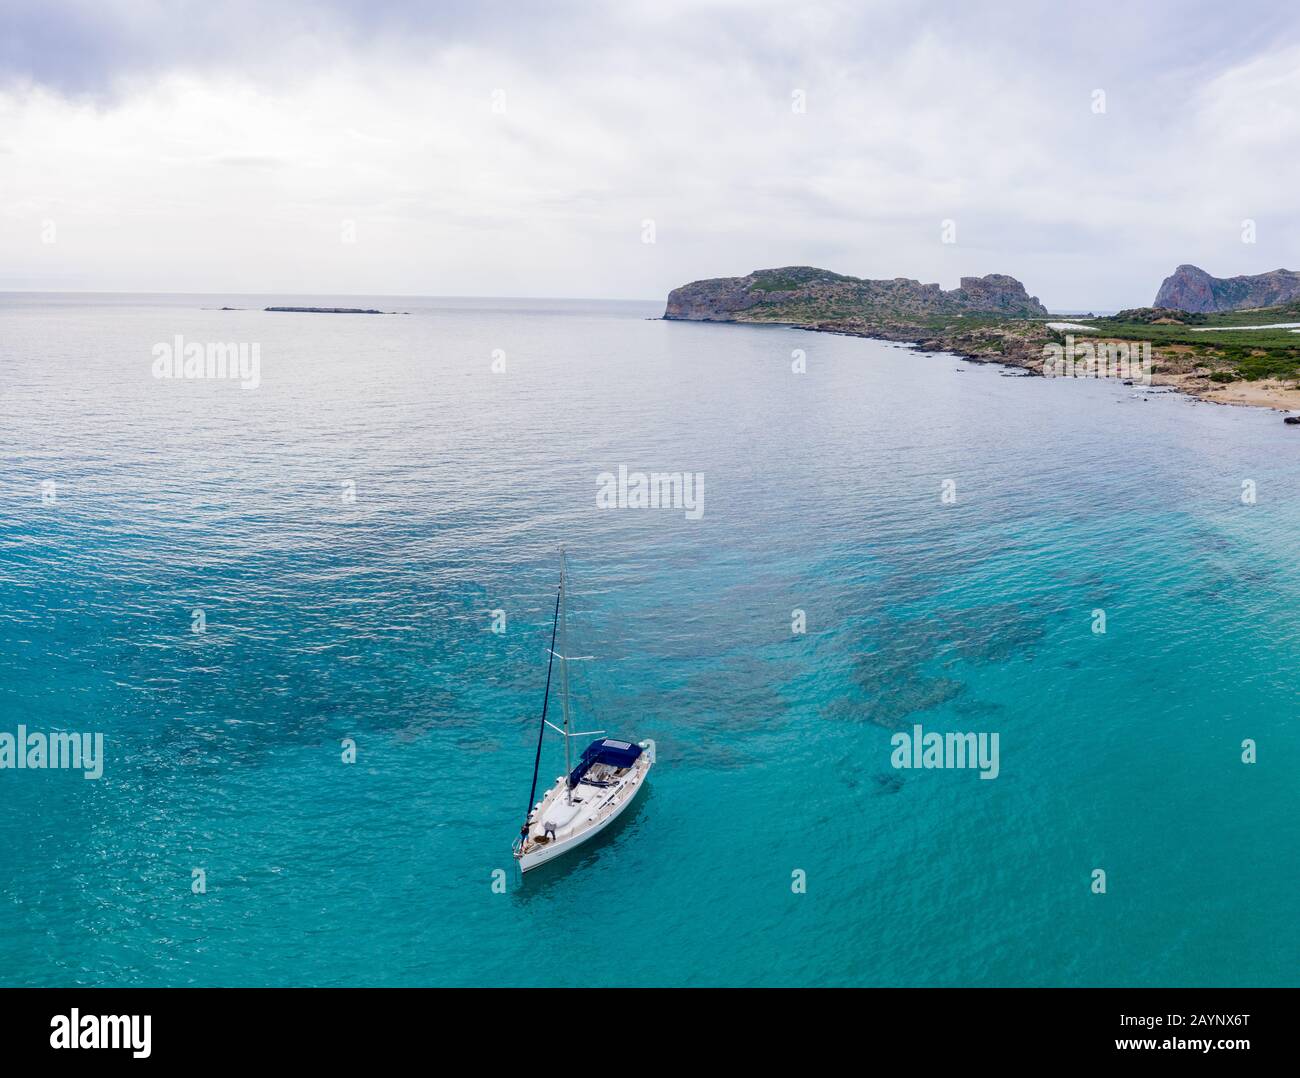 Aerial panoramic drone top view photo of sail boat sailing in mediterranean Aegean island of Crete Greece in summer Stock Photo